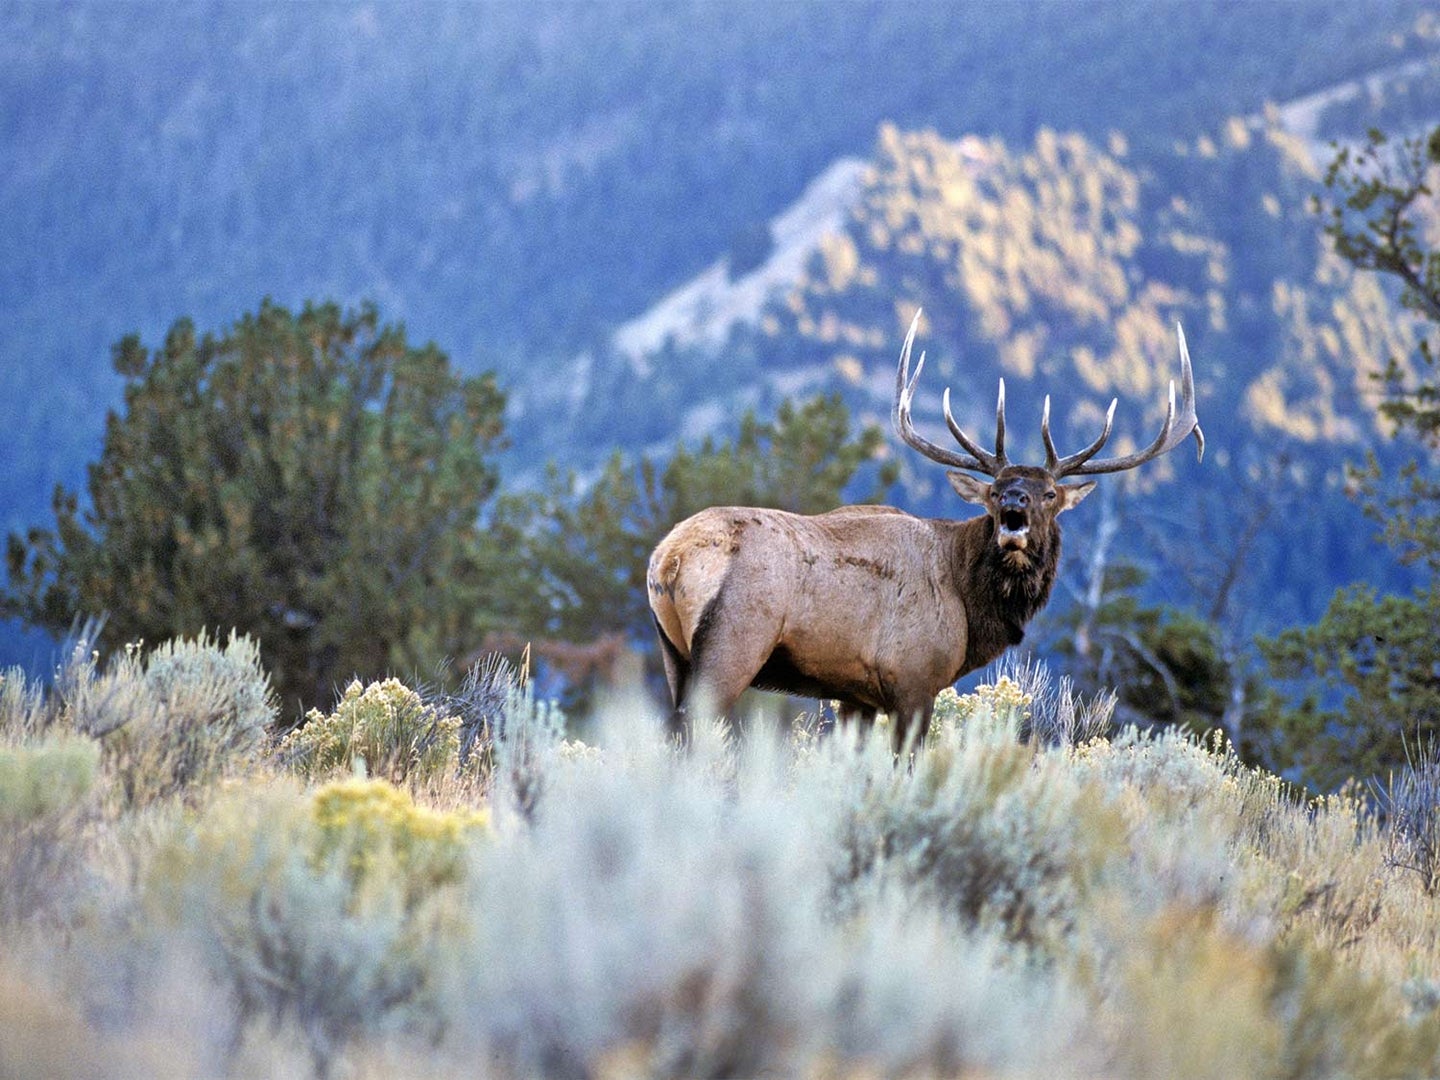 A large elk stands in a large open field with a mountain range in the distance.